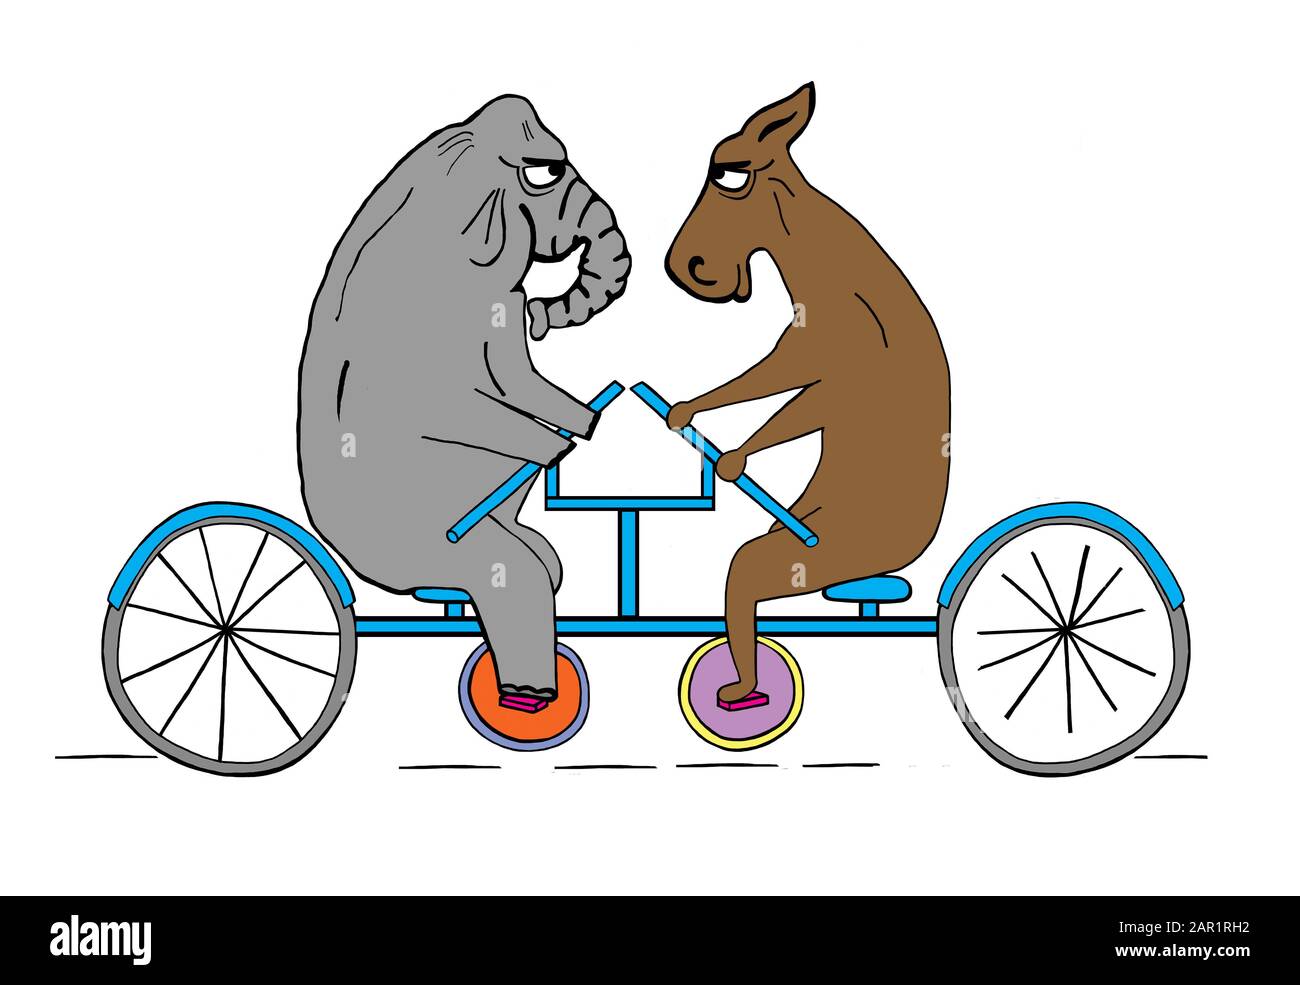 An elephant and a donkey peddle against each other Stock Photo